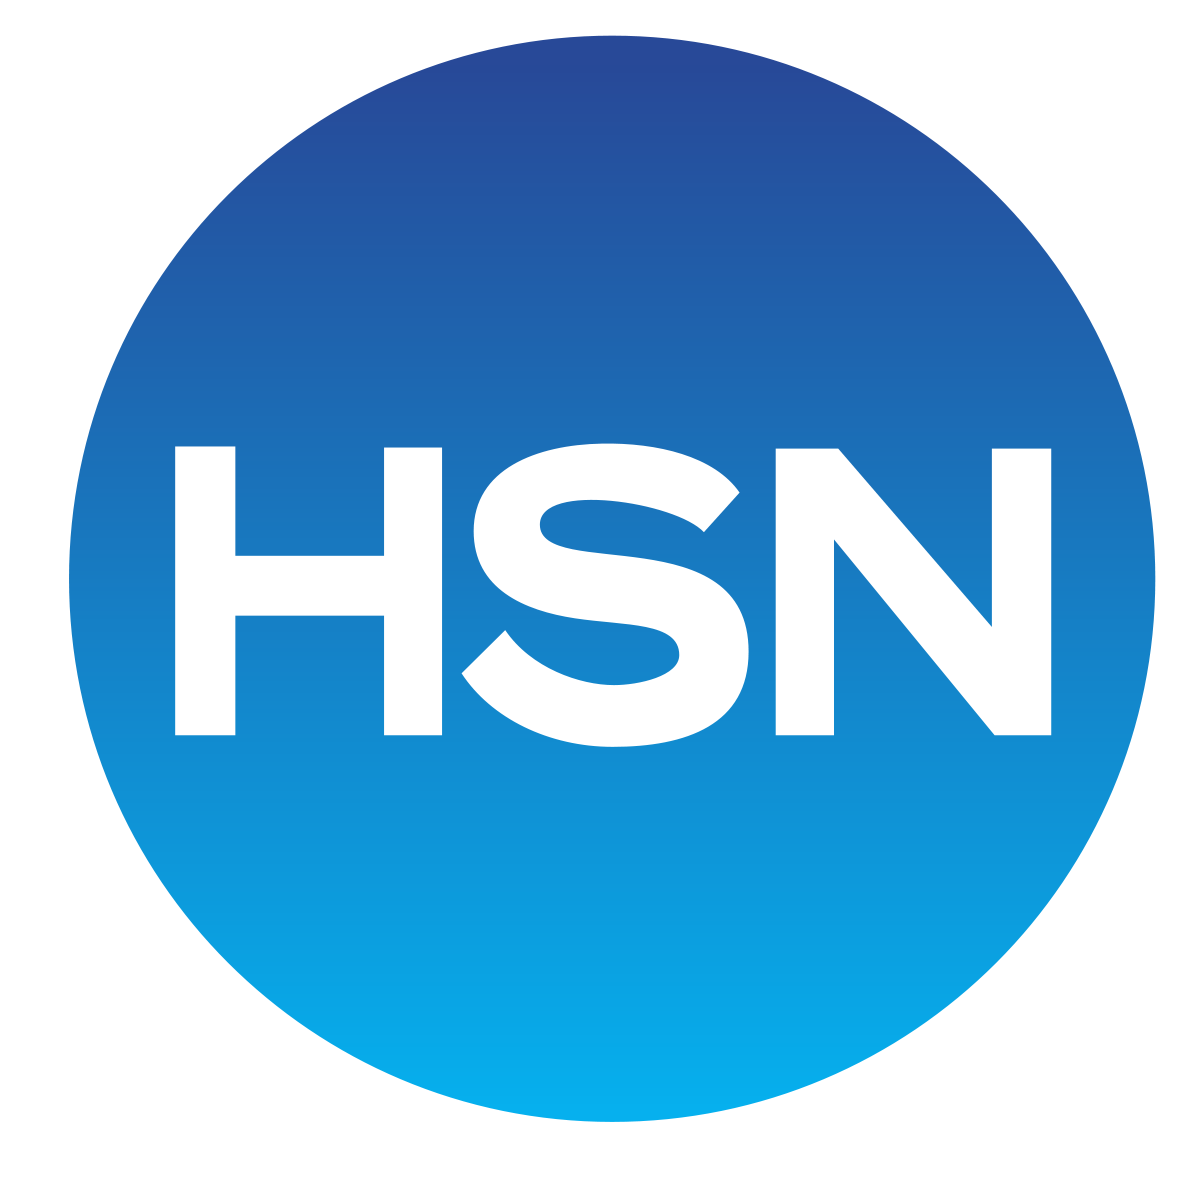 The Home Shopping Network logo